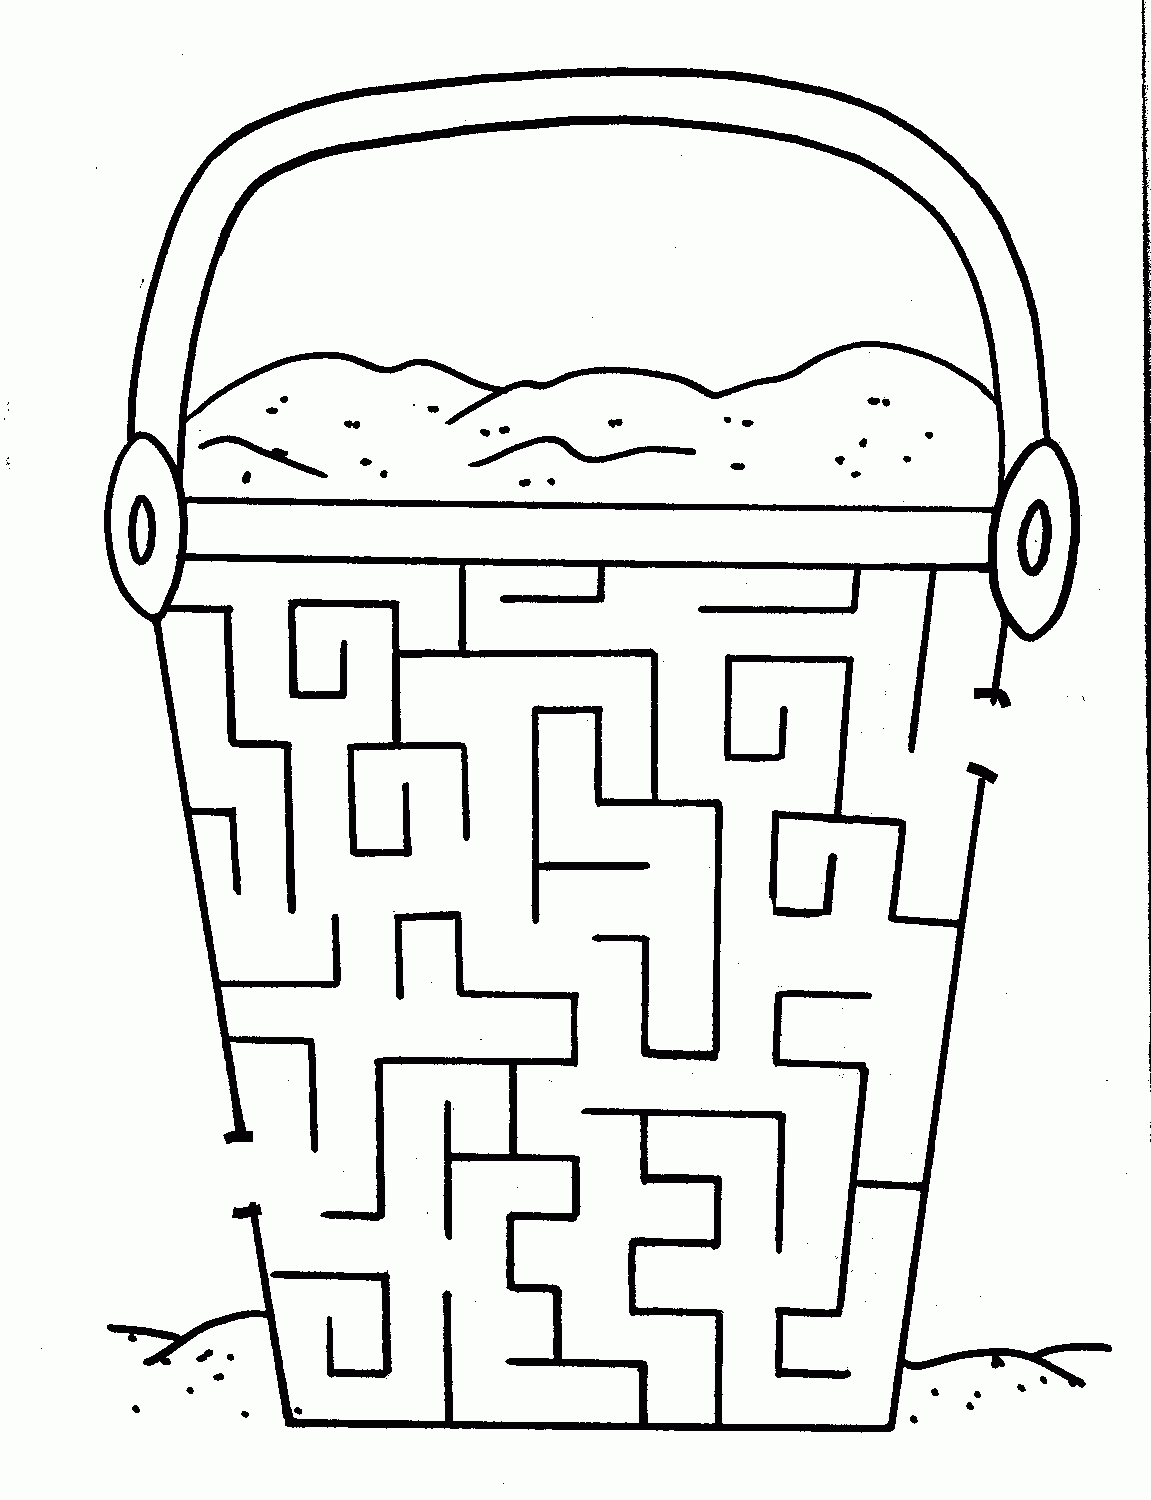 Try Your Hand At Our Free Printable Mazes For Kids. | Under The Sea - Free Printable Mazes For Kids